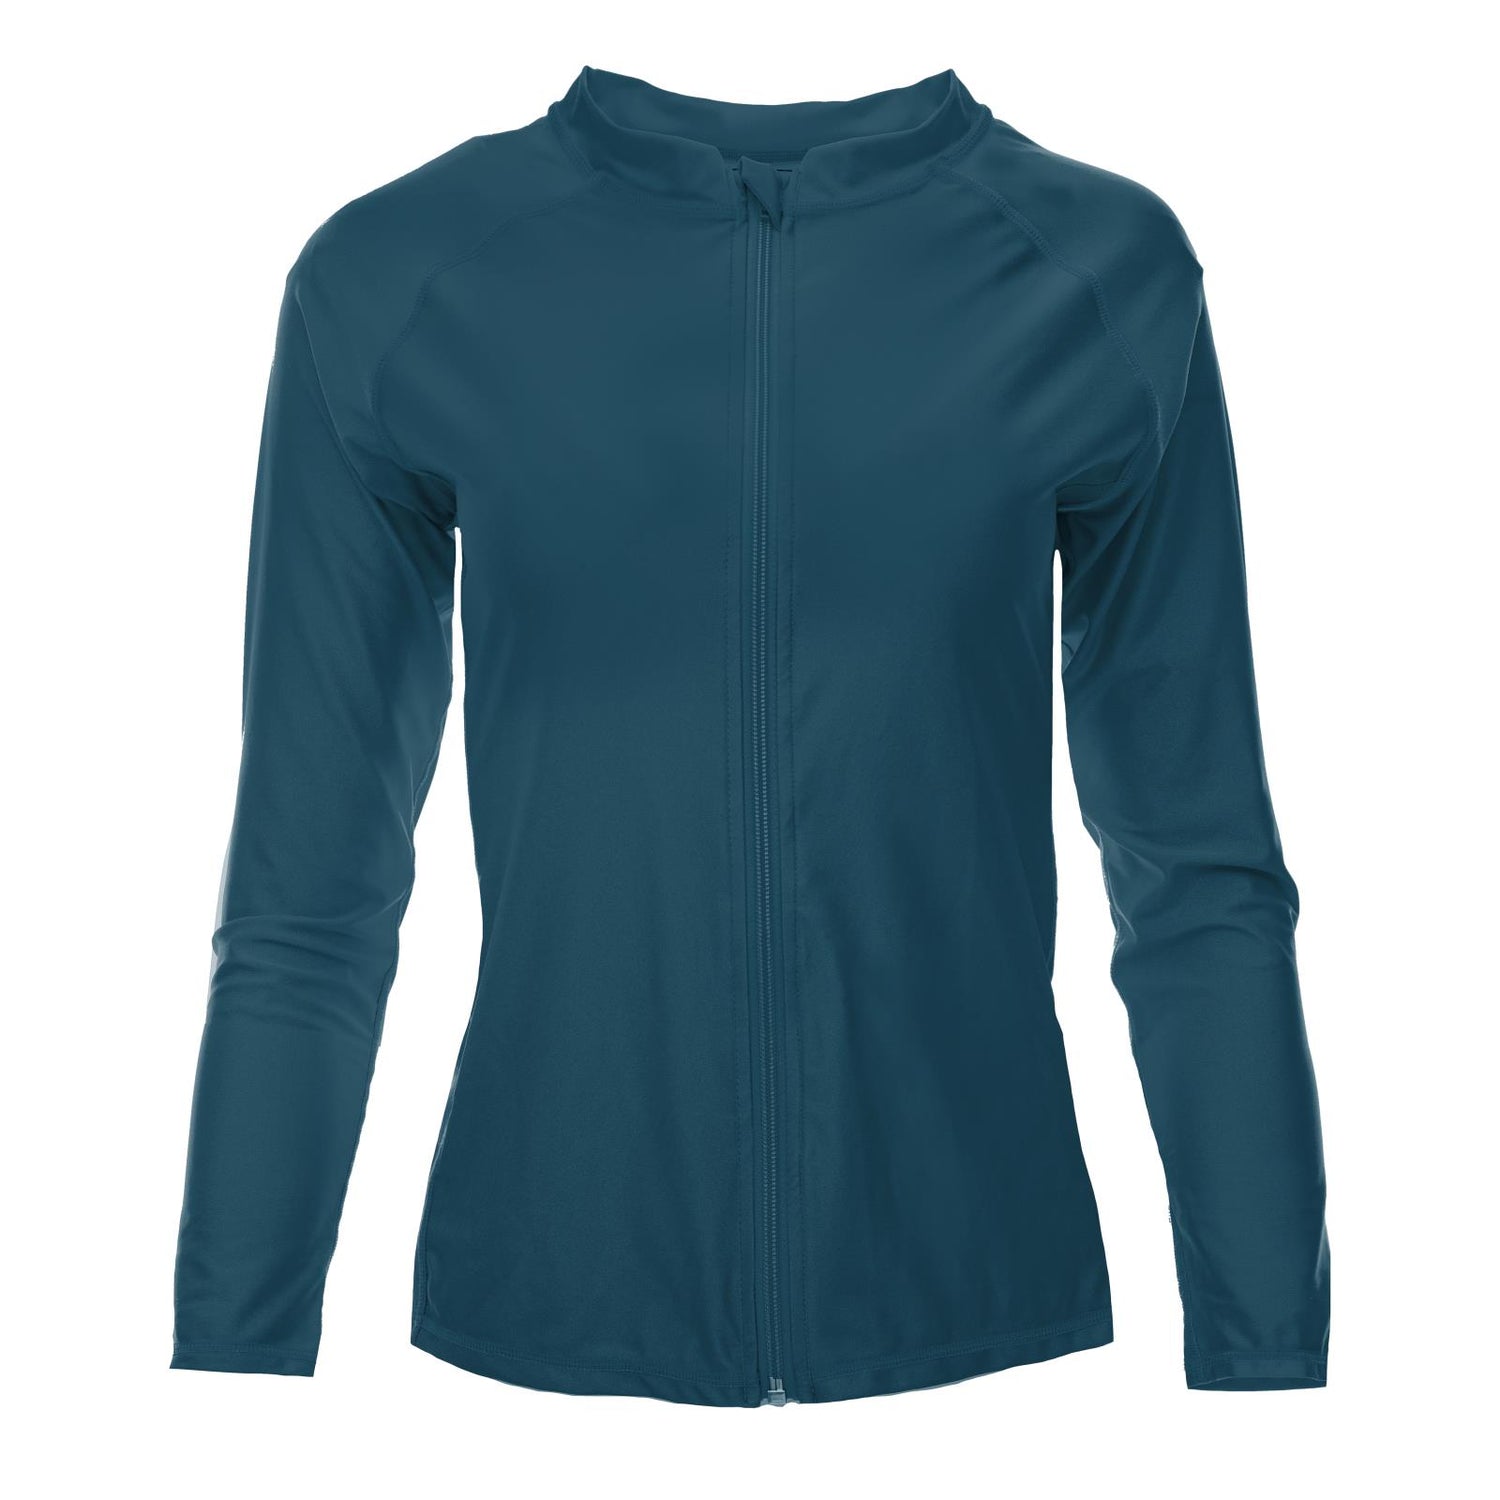 Women's Long Sleeve Swim and Sun Cover Up in Peacock